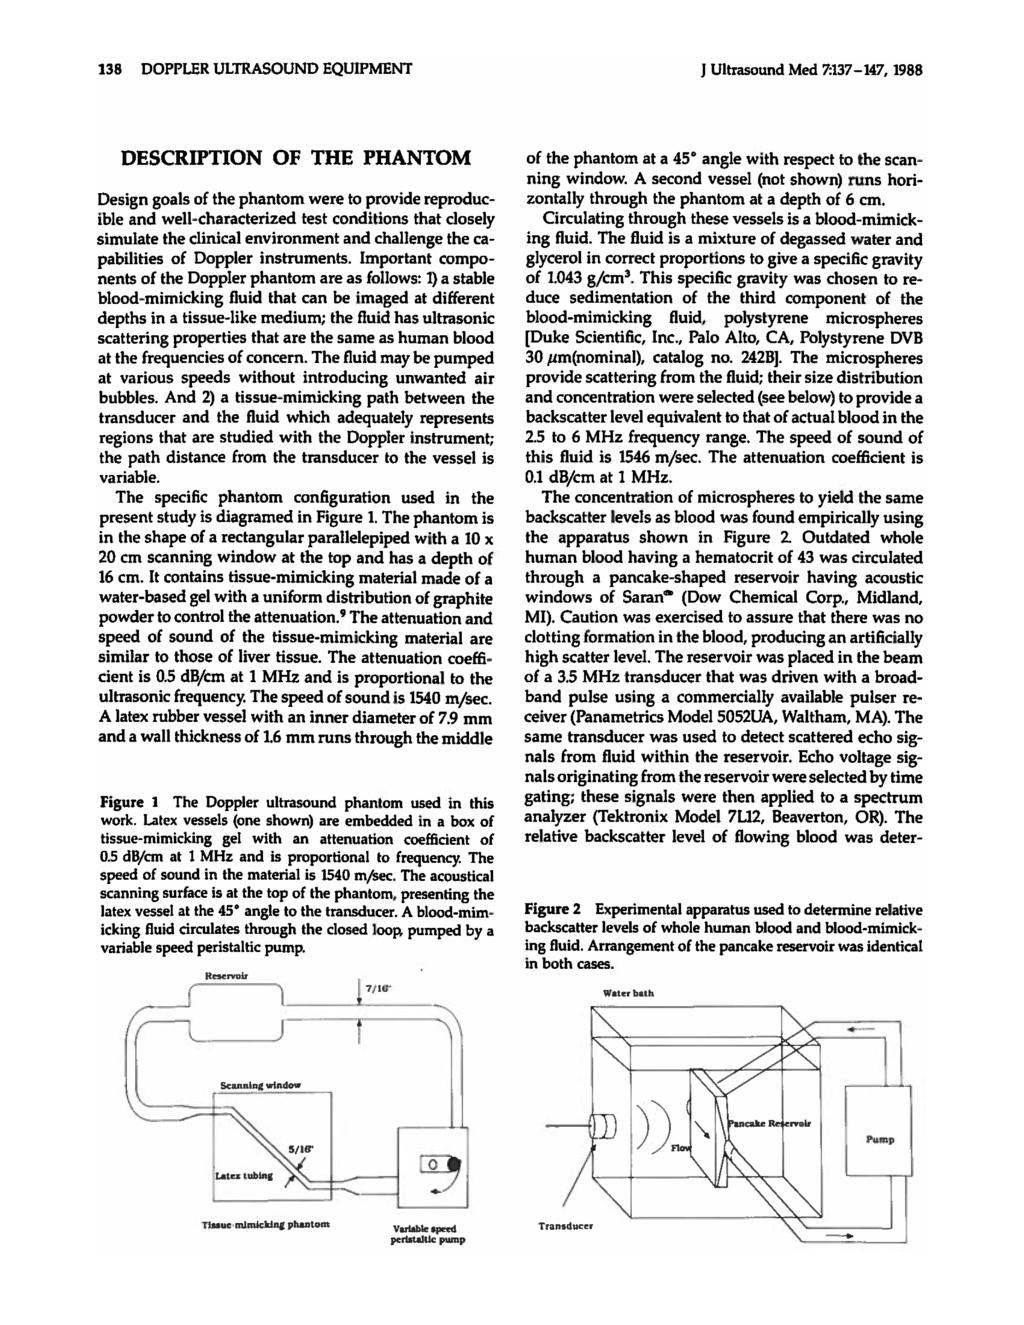 138 DOPPLER ULTRASOUND EQUIPMENT l Ultrasound Med 7:137-147, 1988 DESCRIPTION OF THE PHANTOM Design goals of the phantom were to provide reproducible and well-characterized test conditions that